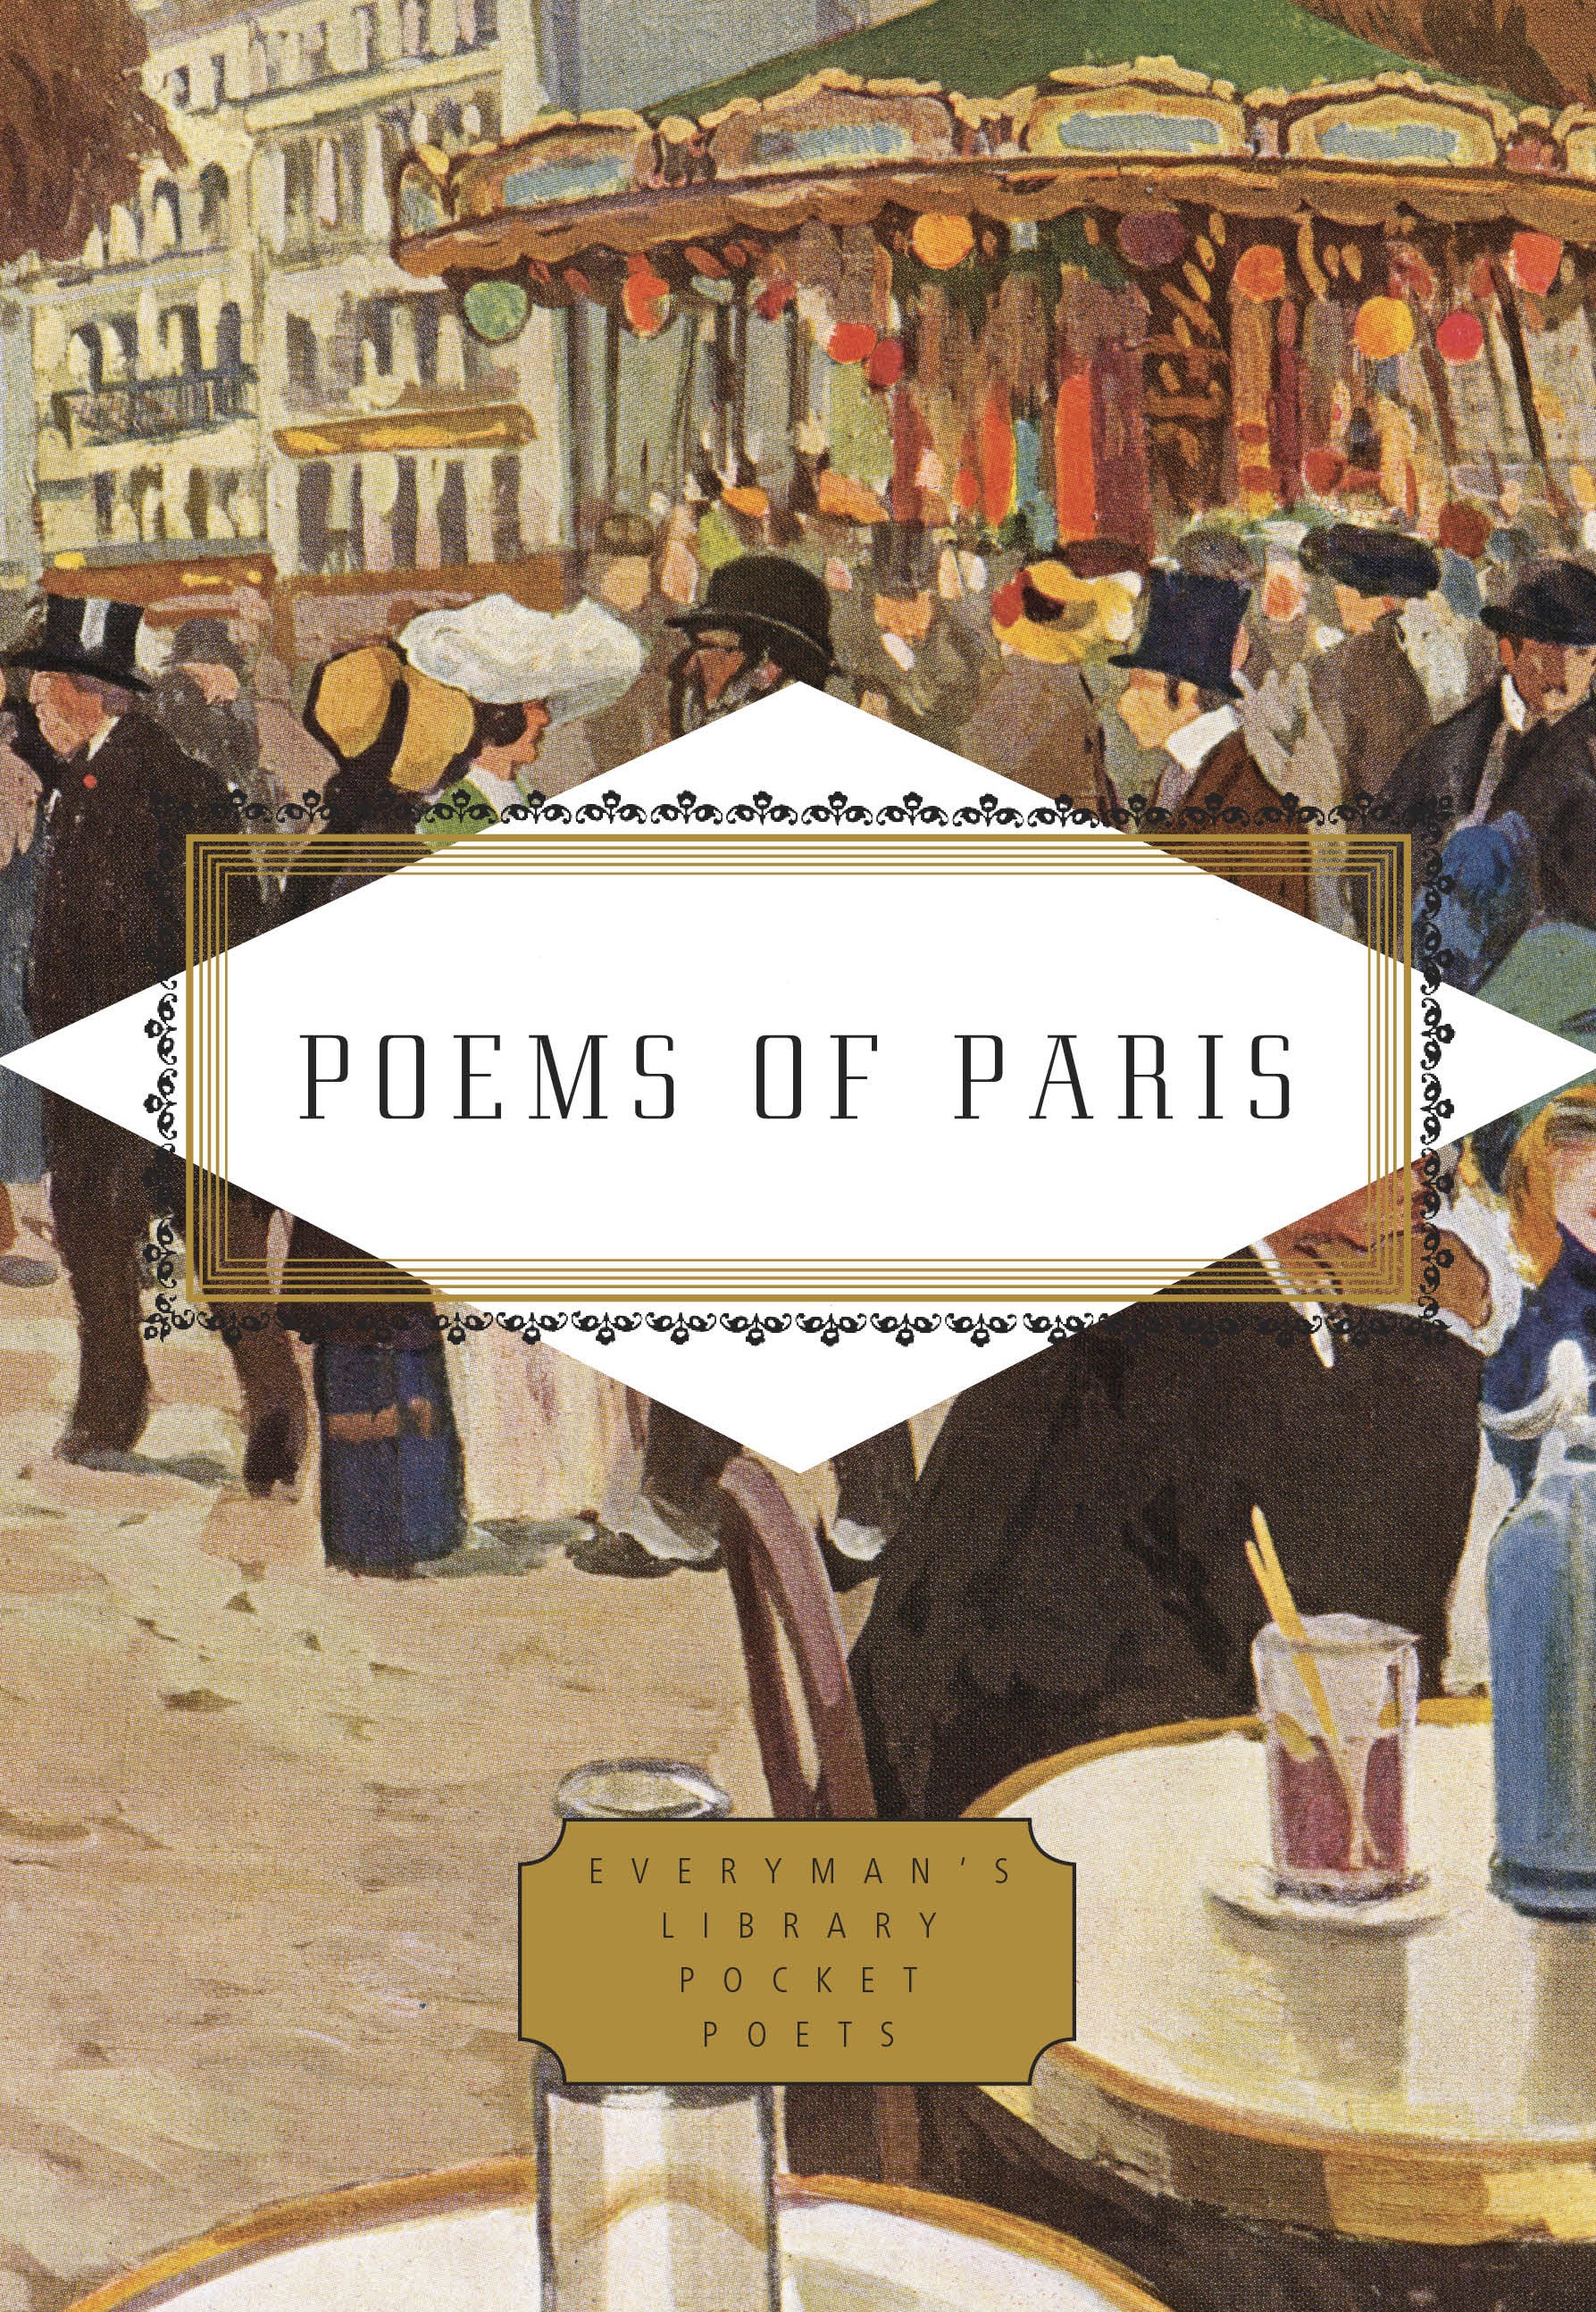 Book “Poems of Paris” by Emily Fragos — March 7, 2019